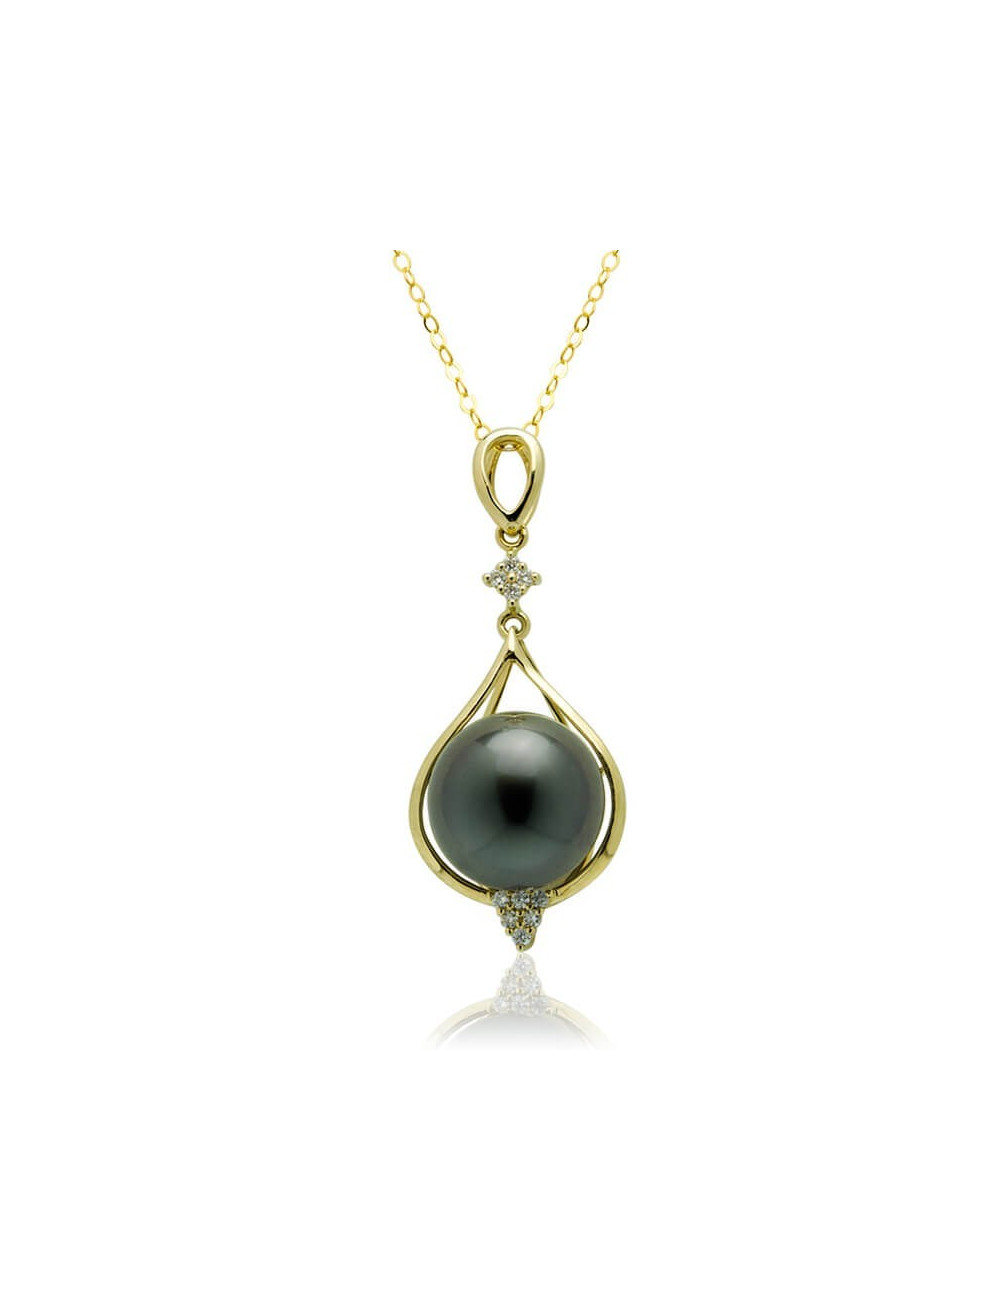 Gold Chain with Elegant Pendant with Tahiti Pearl and Diamonds LANT105182G